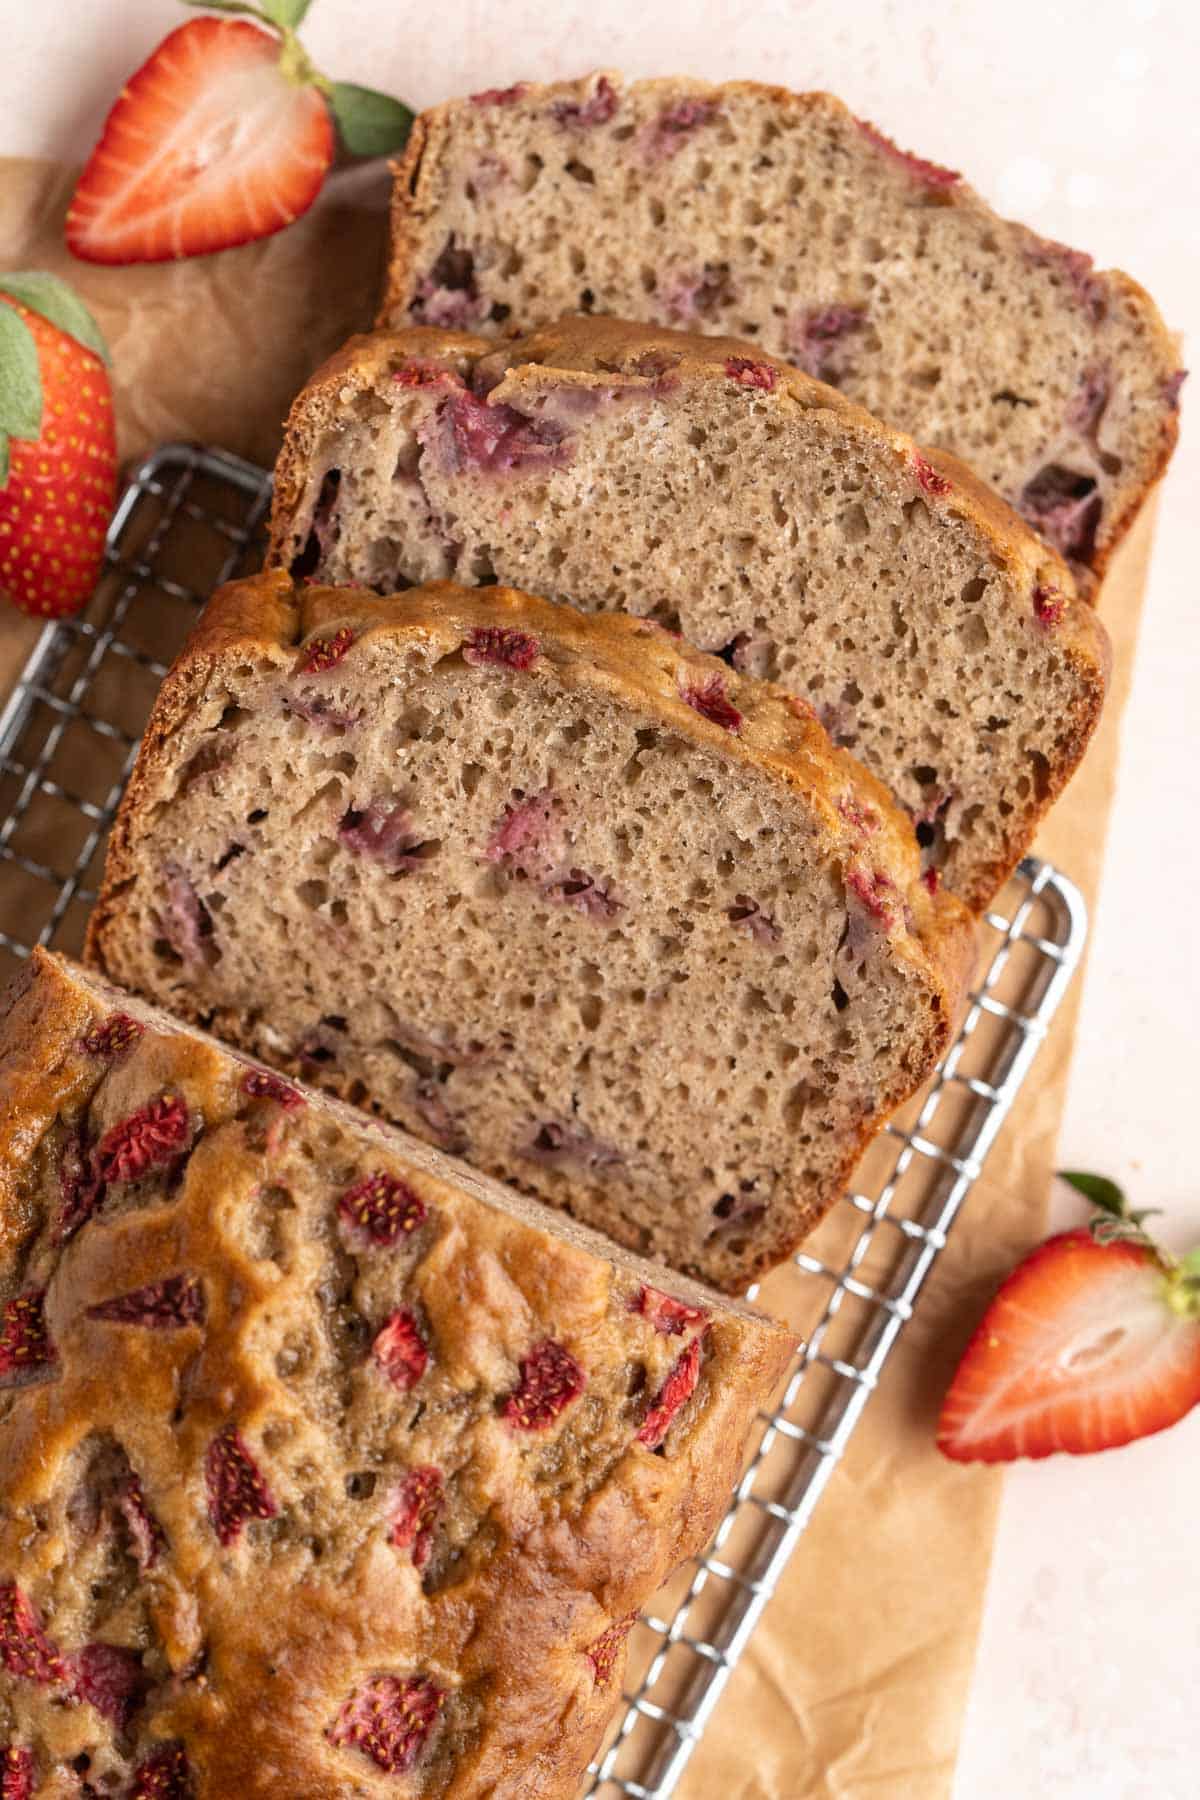 Sliced strawberry banana bread on a wire rack.